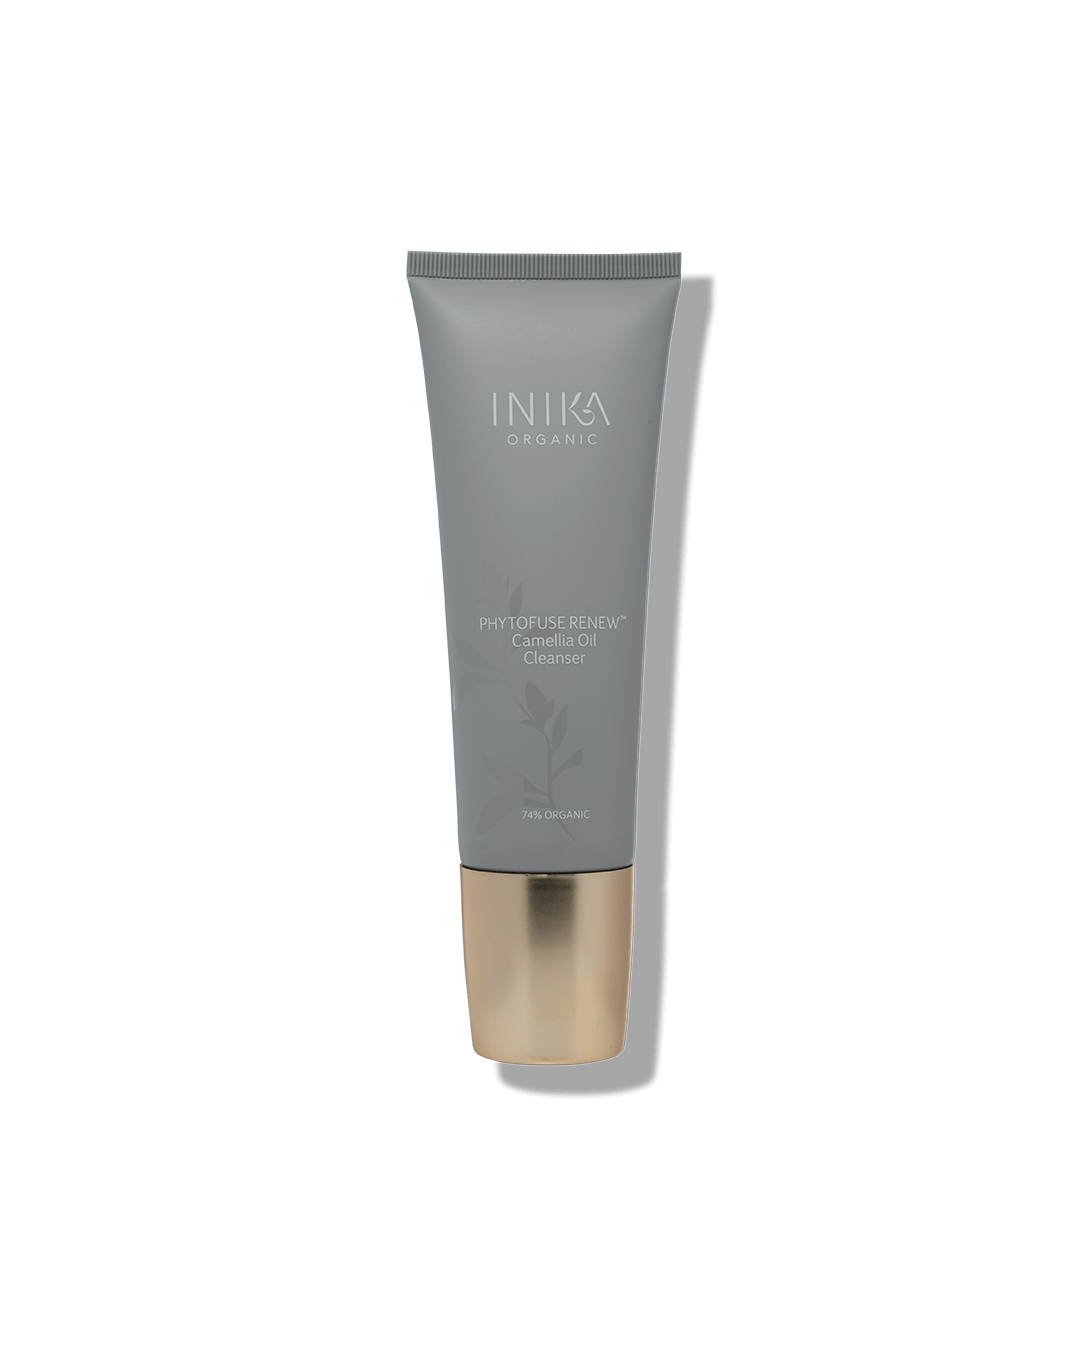 Phytofuse Renew Camellia Oil Cleanser